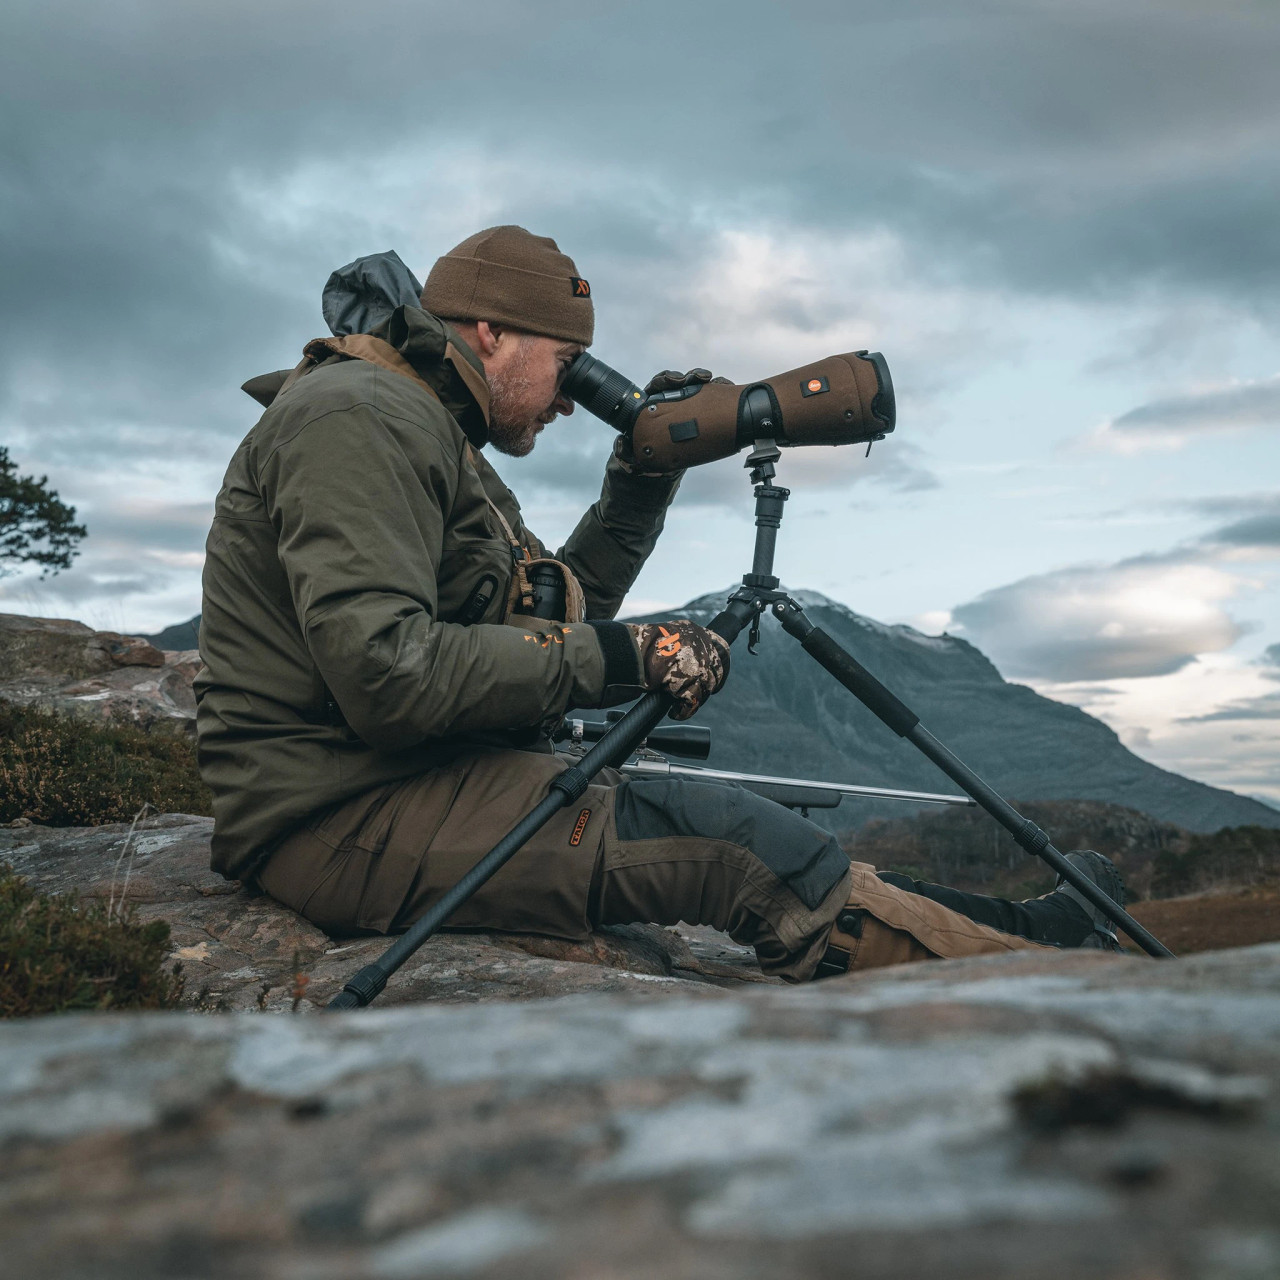 This Is Spartan! - Will O'Meara's Ascent Tripod Review - Spartan